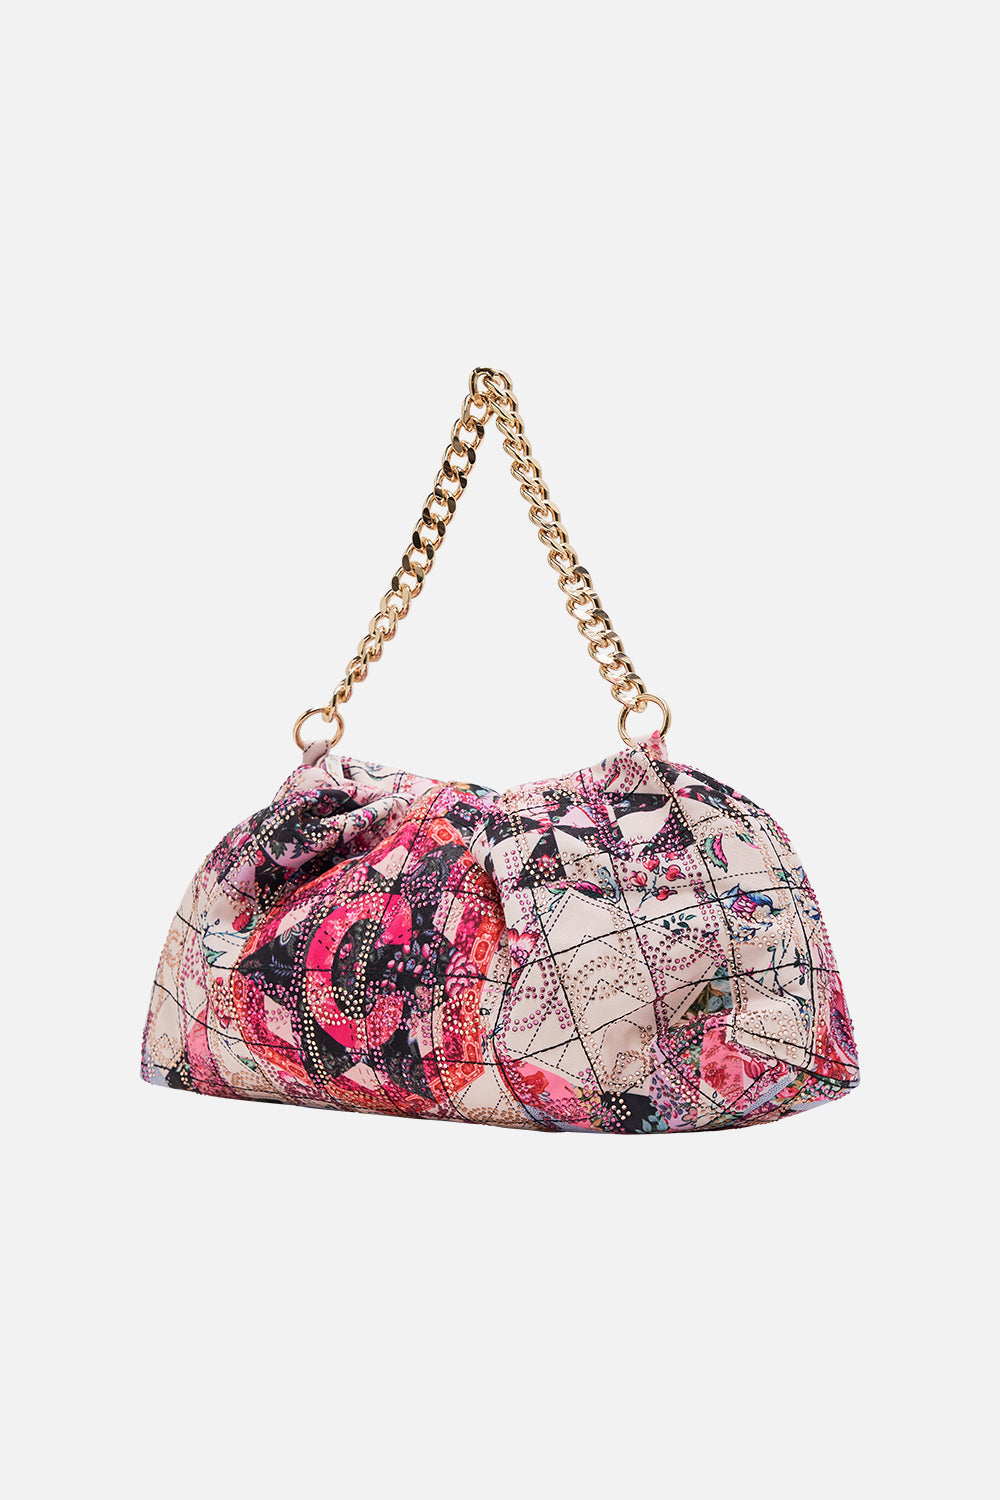 CAMILLA floral oversized clutch with chain in Patchwork Poetry